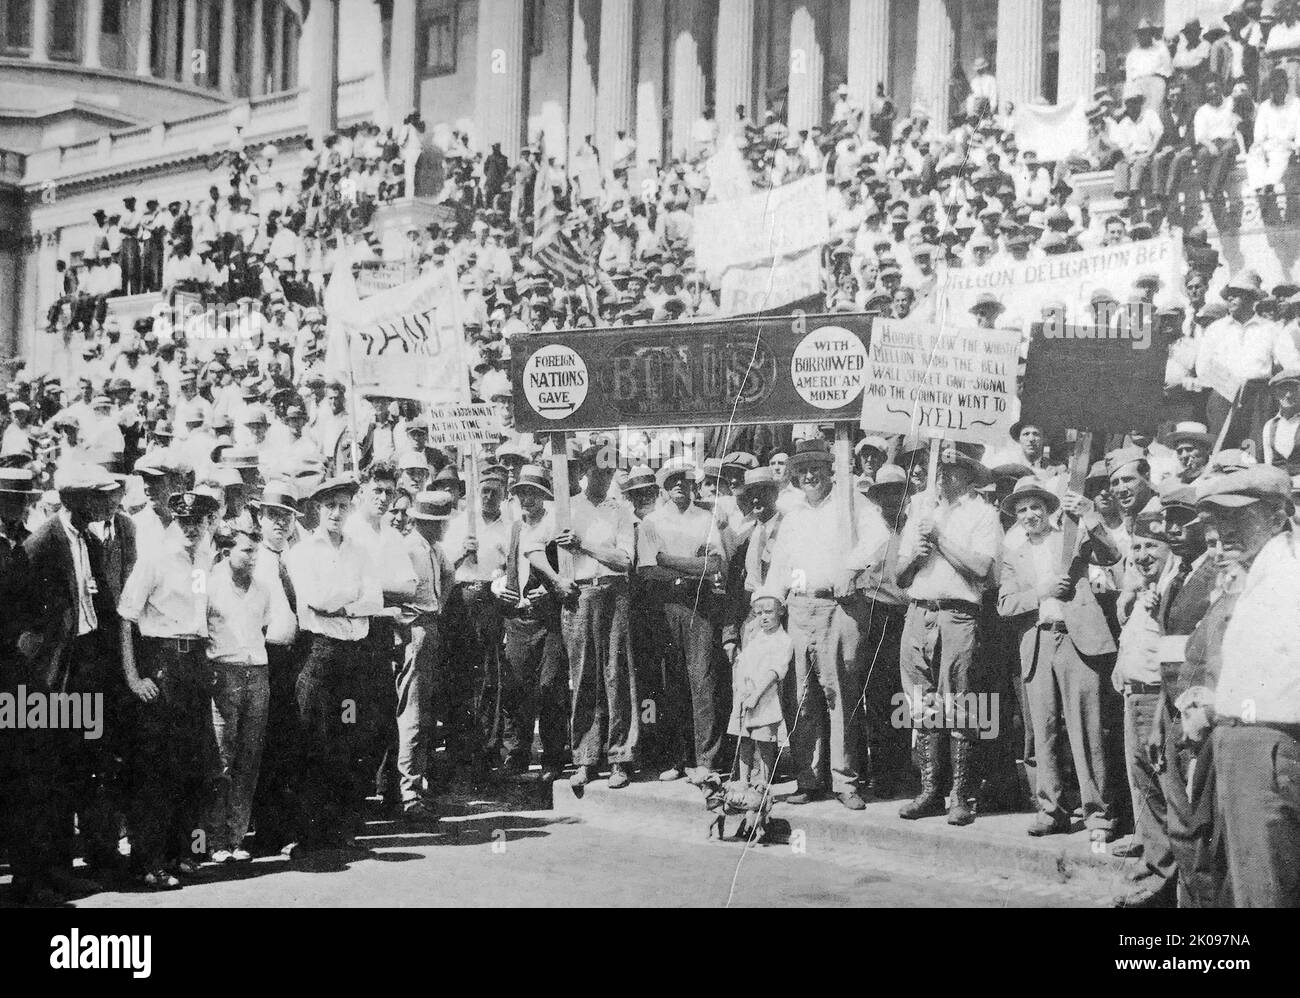 Newspaper report of the Bonus Army, made up of unemployed veterans, protesting on Capitol steps, Washington, USA. Stock Photo